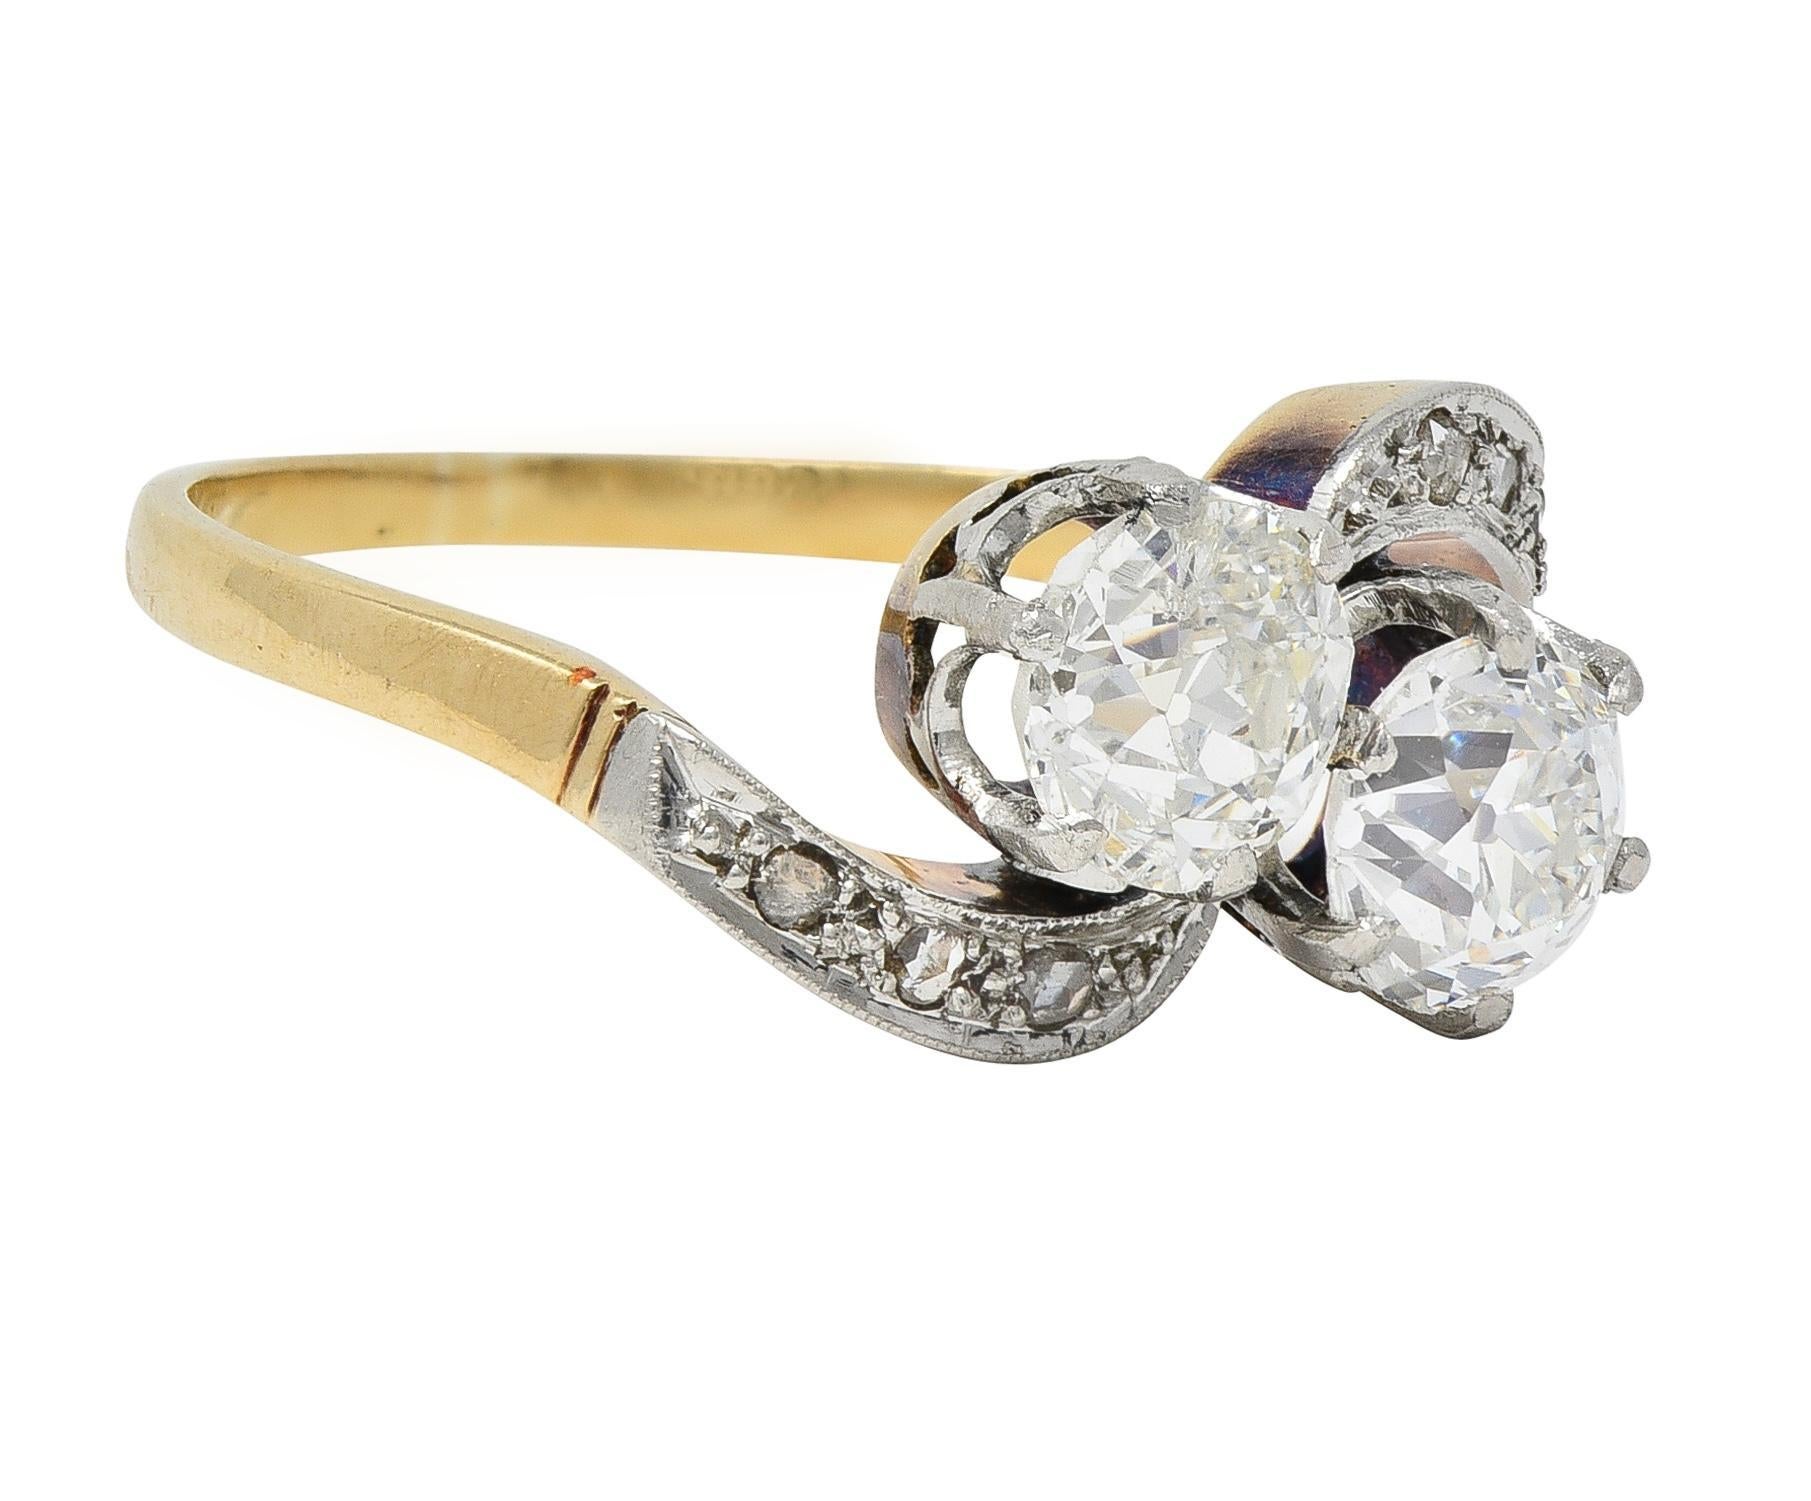 Designed as a Toi et Moi style bypass ring terminating with two old mine cut diamonds prong set in platinum 
Weighing approximately 1.68 carats total - H/I color with VS2 clarity
Flanked by swirled rows of rose cut diamonds 
Weighing approximately